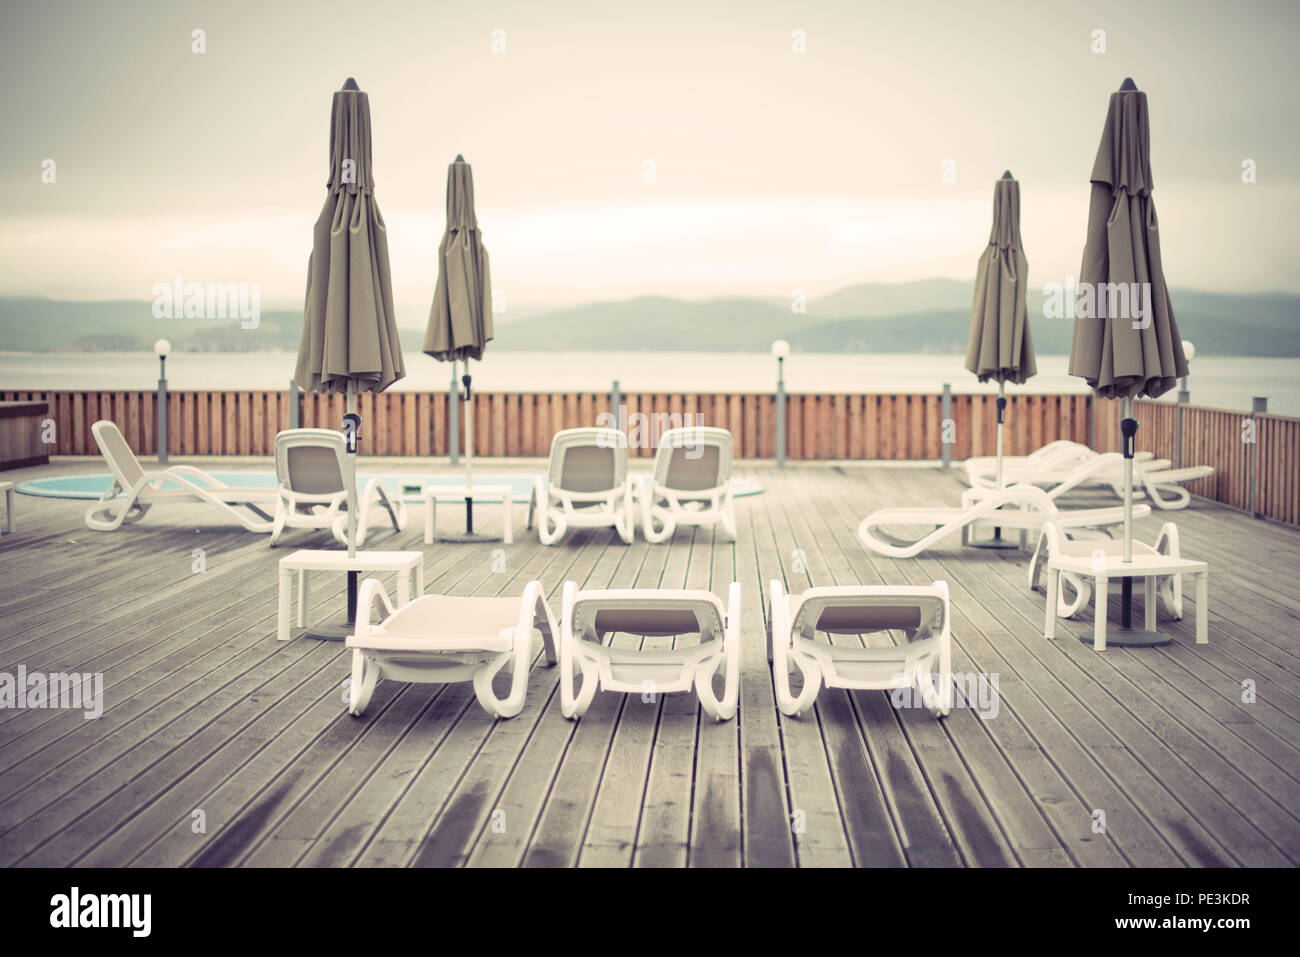 Wooden deck beach sea ocean resort sun lounger umbrella hotel pool sky sunrise. Relax by the sea on the wooden terrace sunset evening Stock Photo